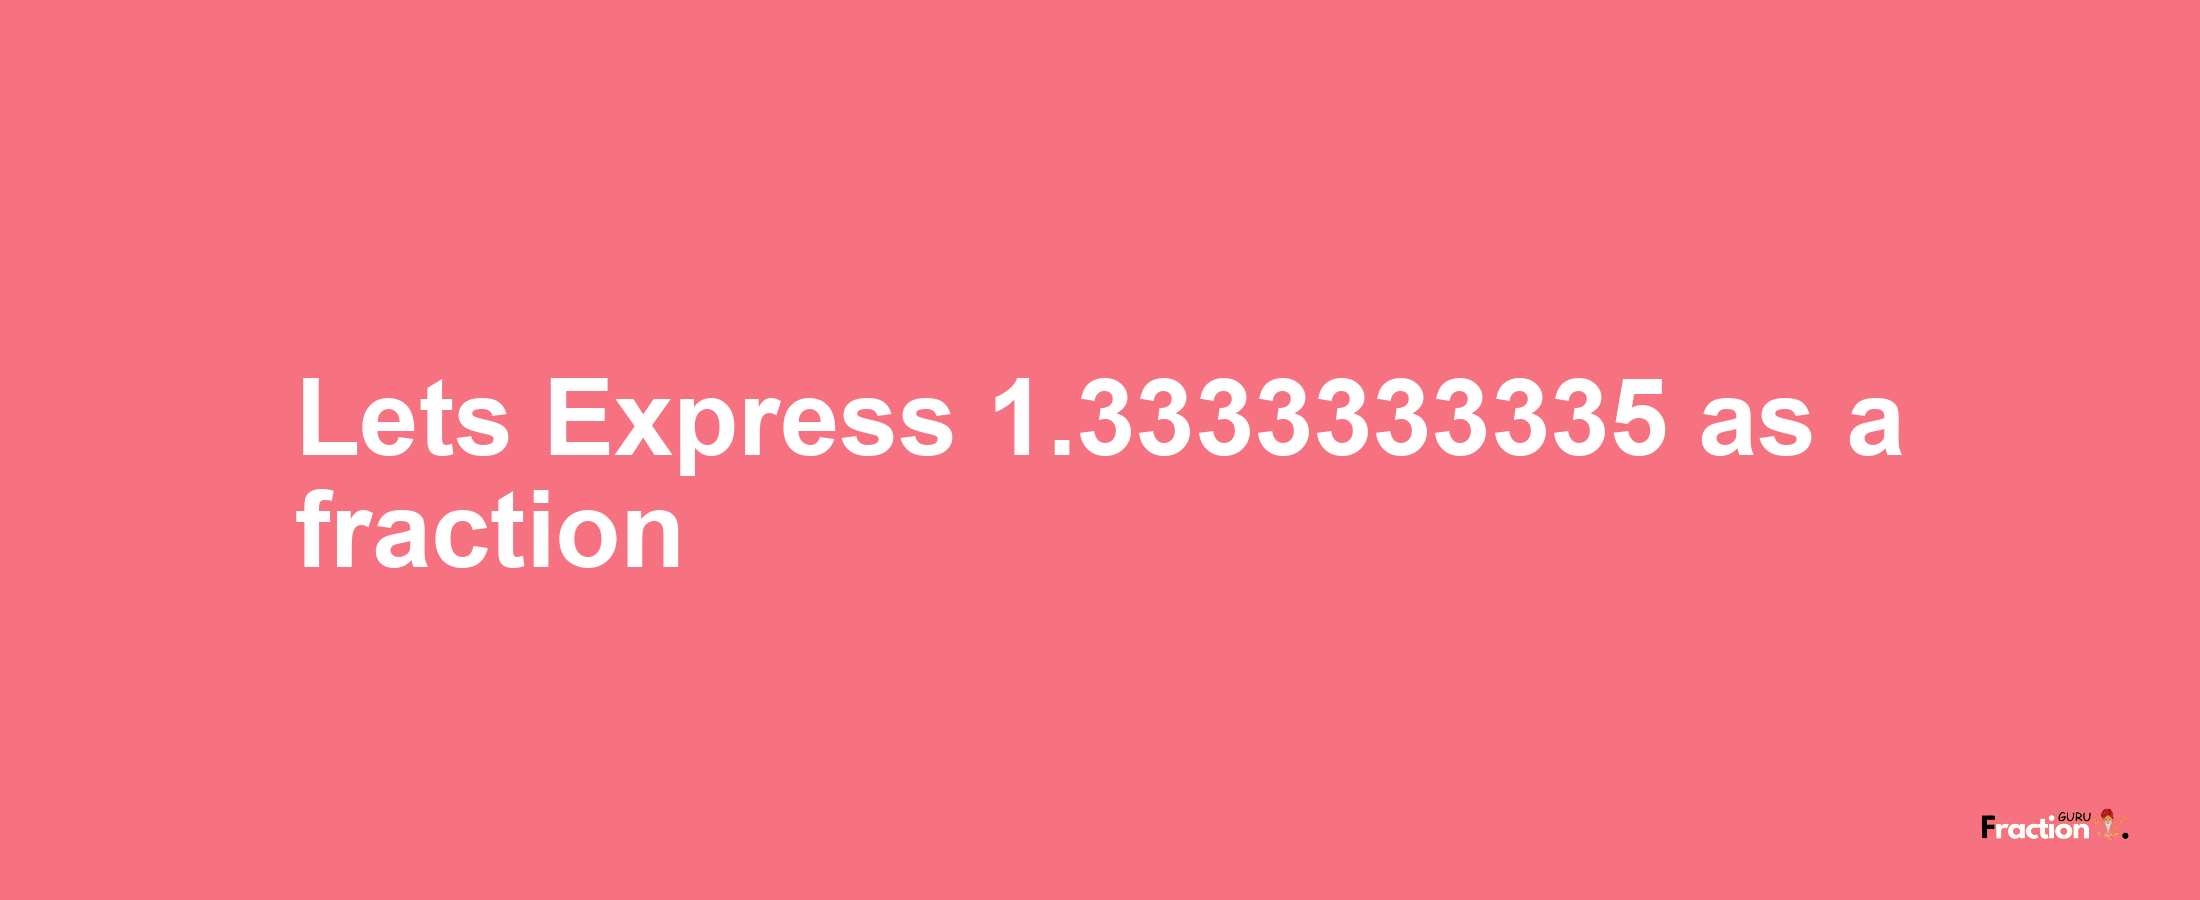 Lets Express 1.3333333335 as afraction